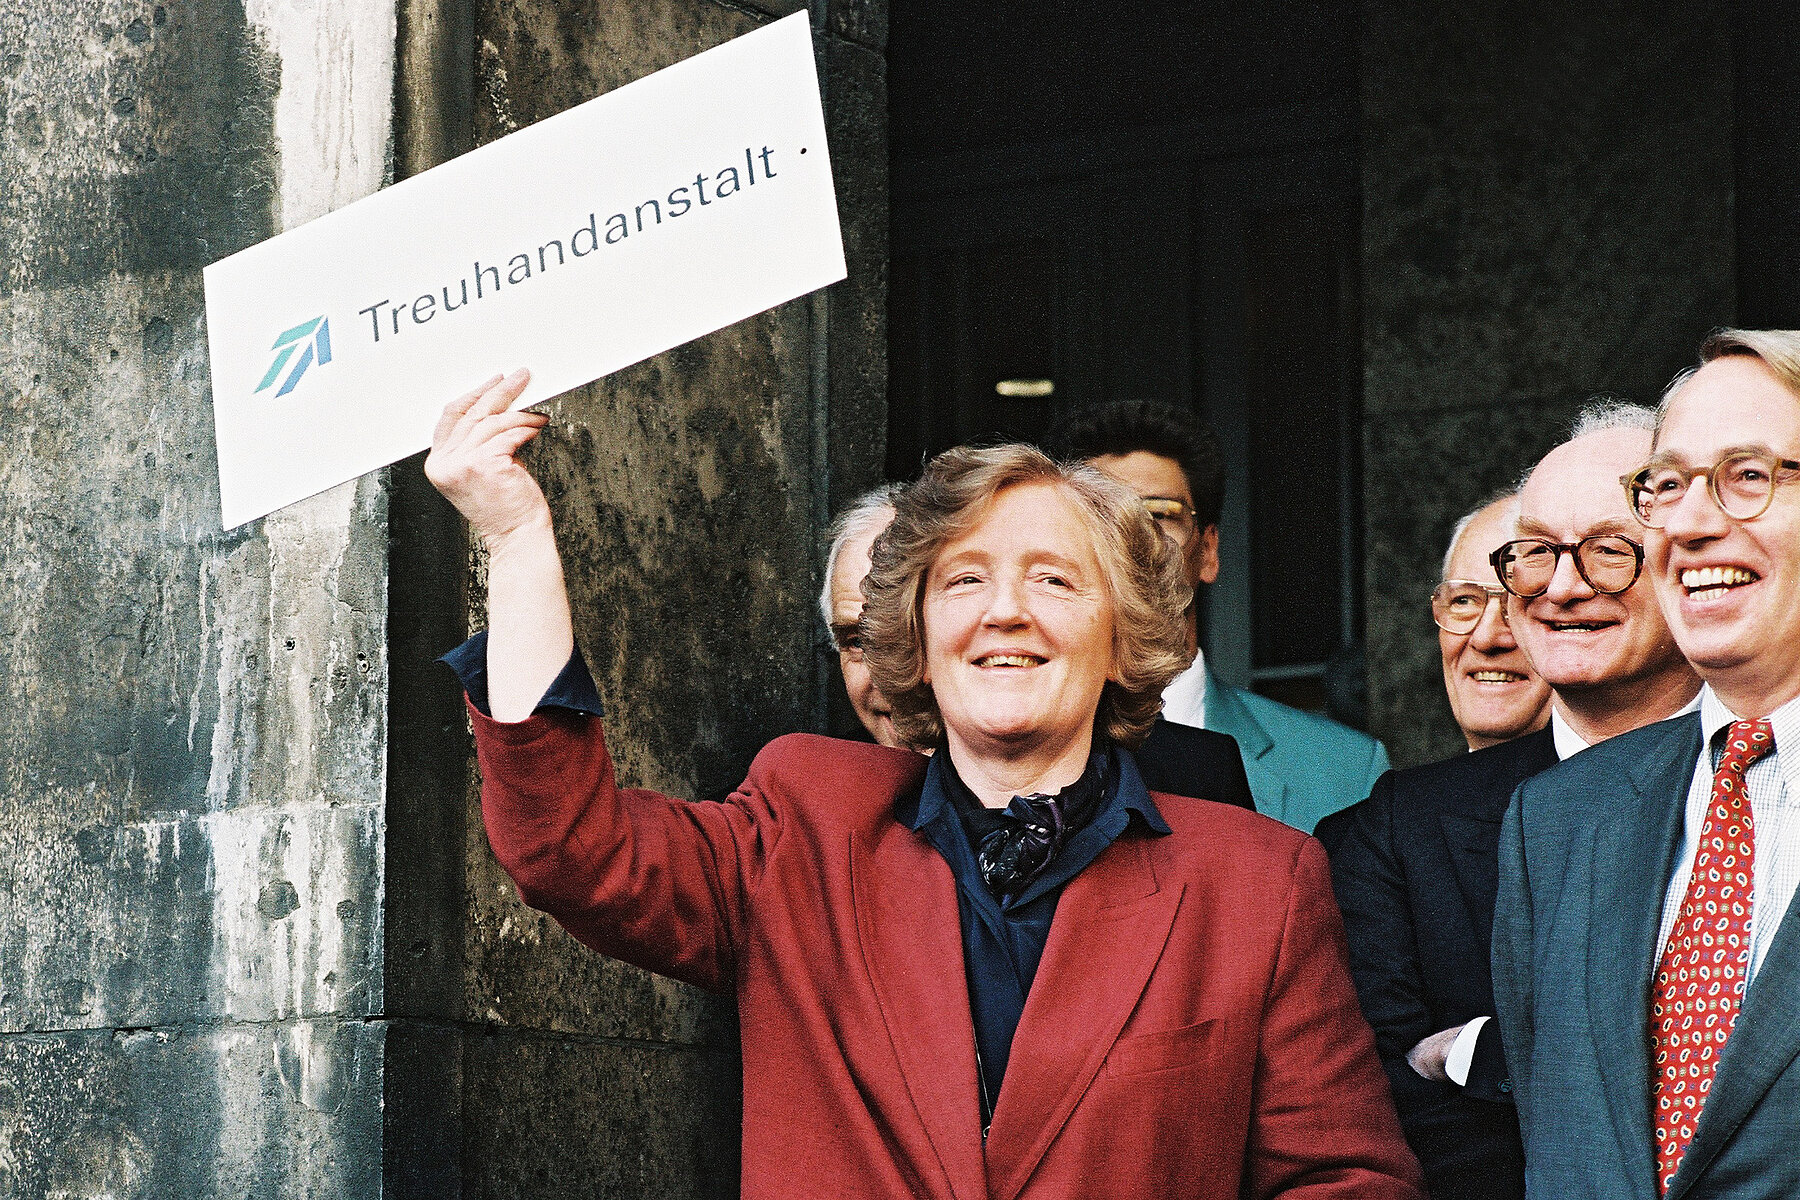 Treuhand President Birgit Breuel wears a red blazer. In her right hand she holds a sign saying Treuhand. Men in suits stand to her right.